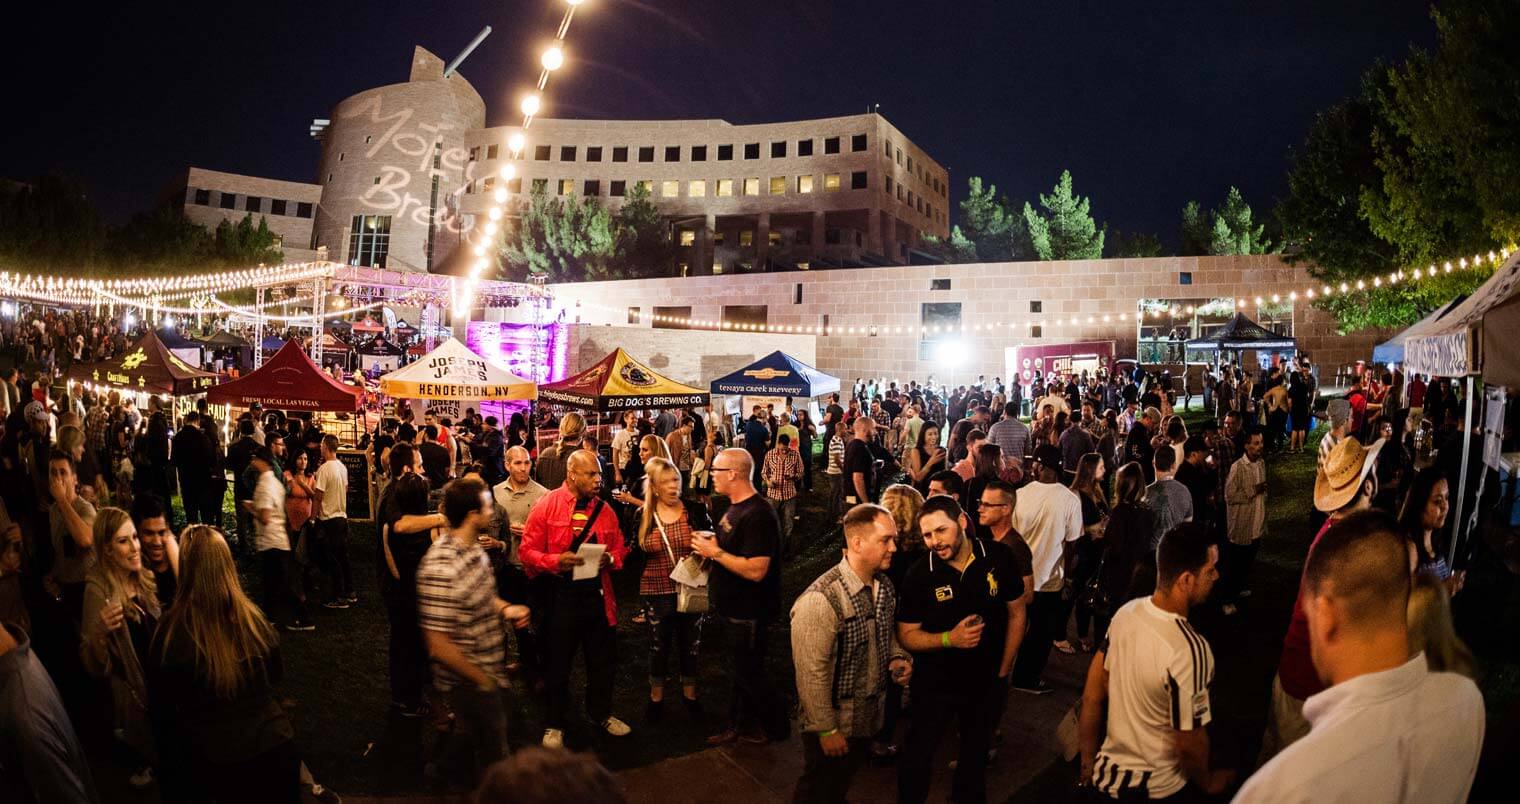 Motley Brews’ 4th Annual Downtown Brew Festival in Las Vegas Lights Up the Night, crowd